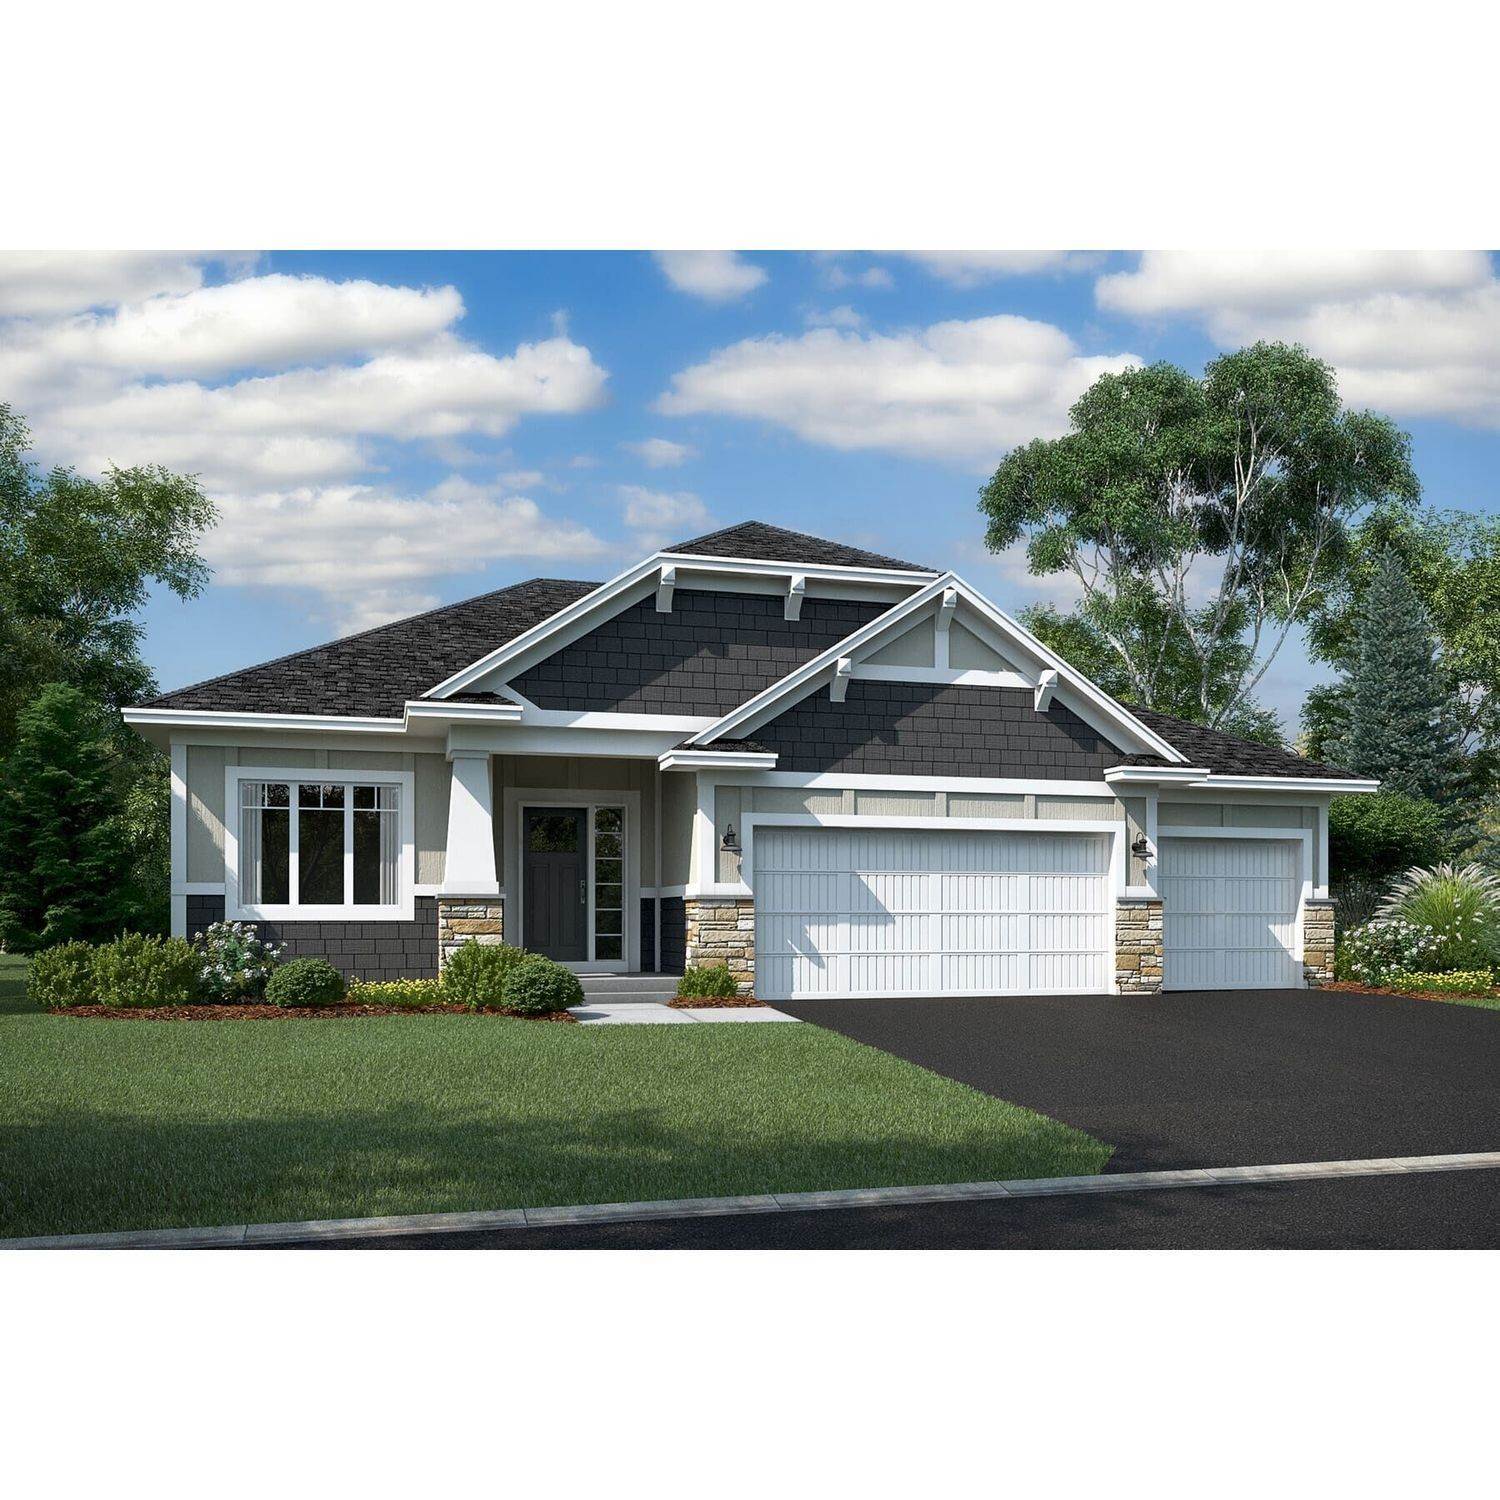 Single Family for Sale at Lino Lakes, MN 55014